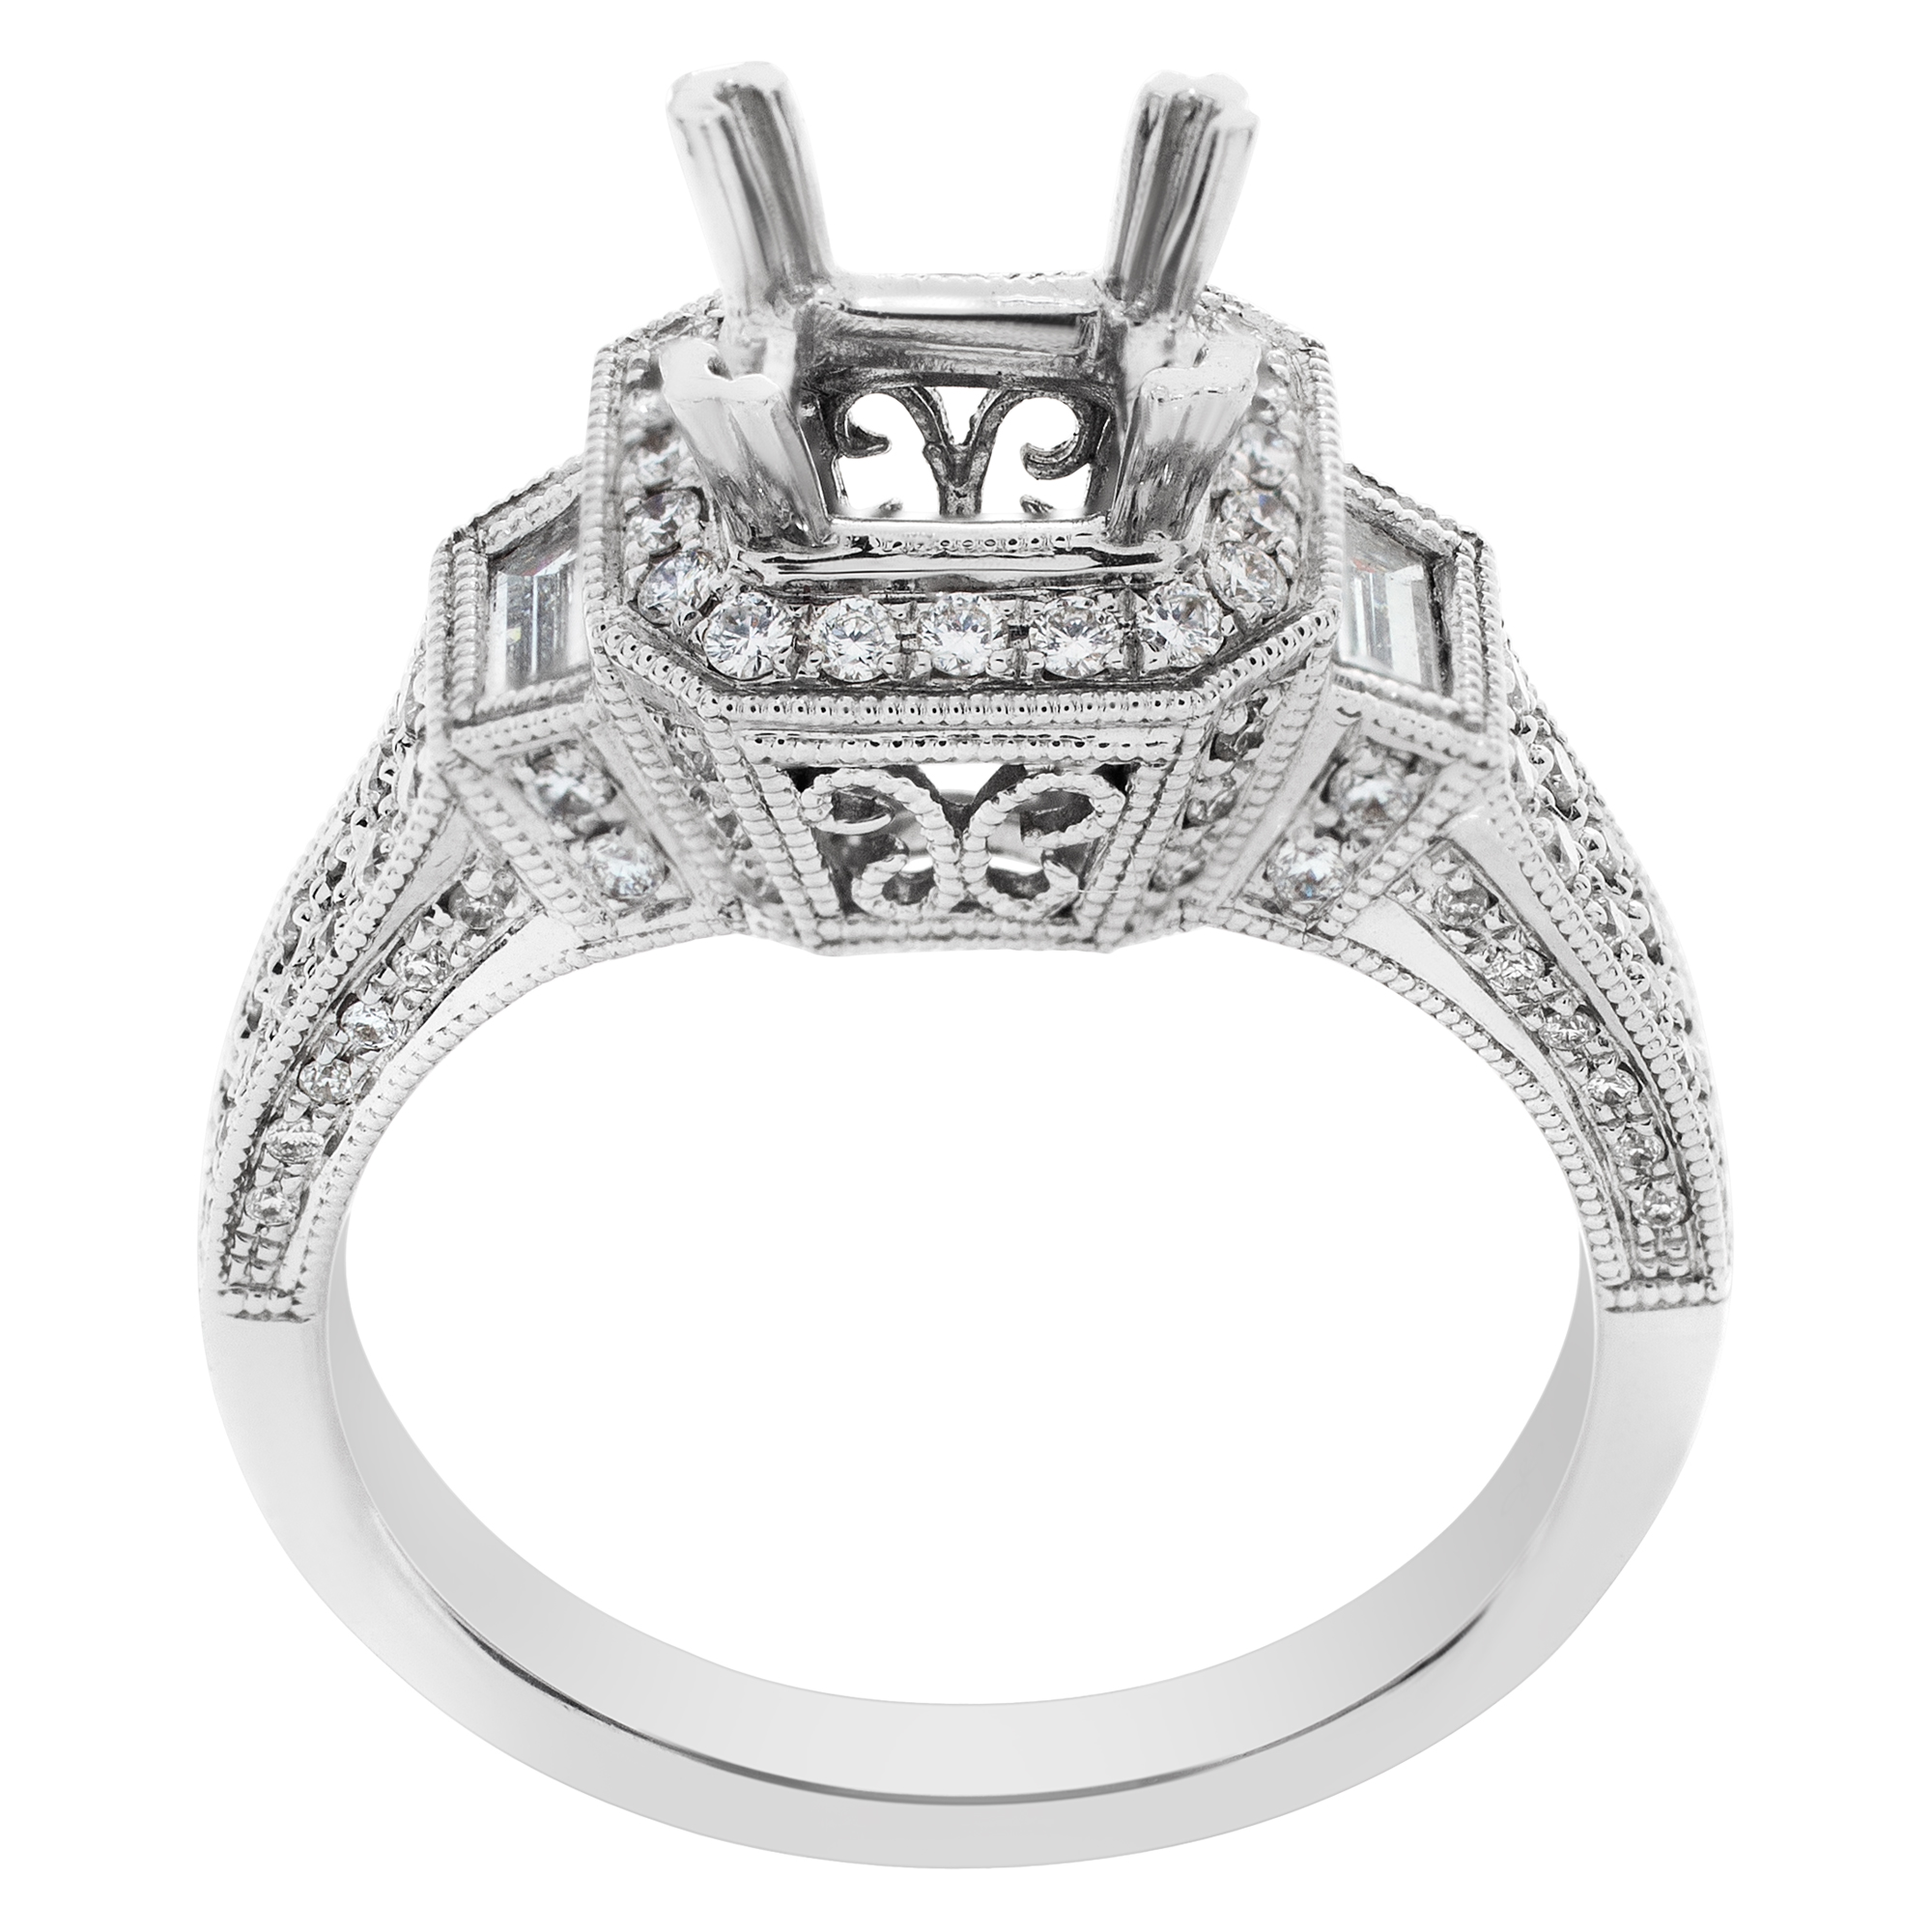 18k white gold mounting for approx. 1 carat square stone, with approx. 1.64 carat diamond. Size 5.5